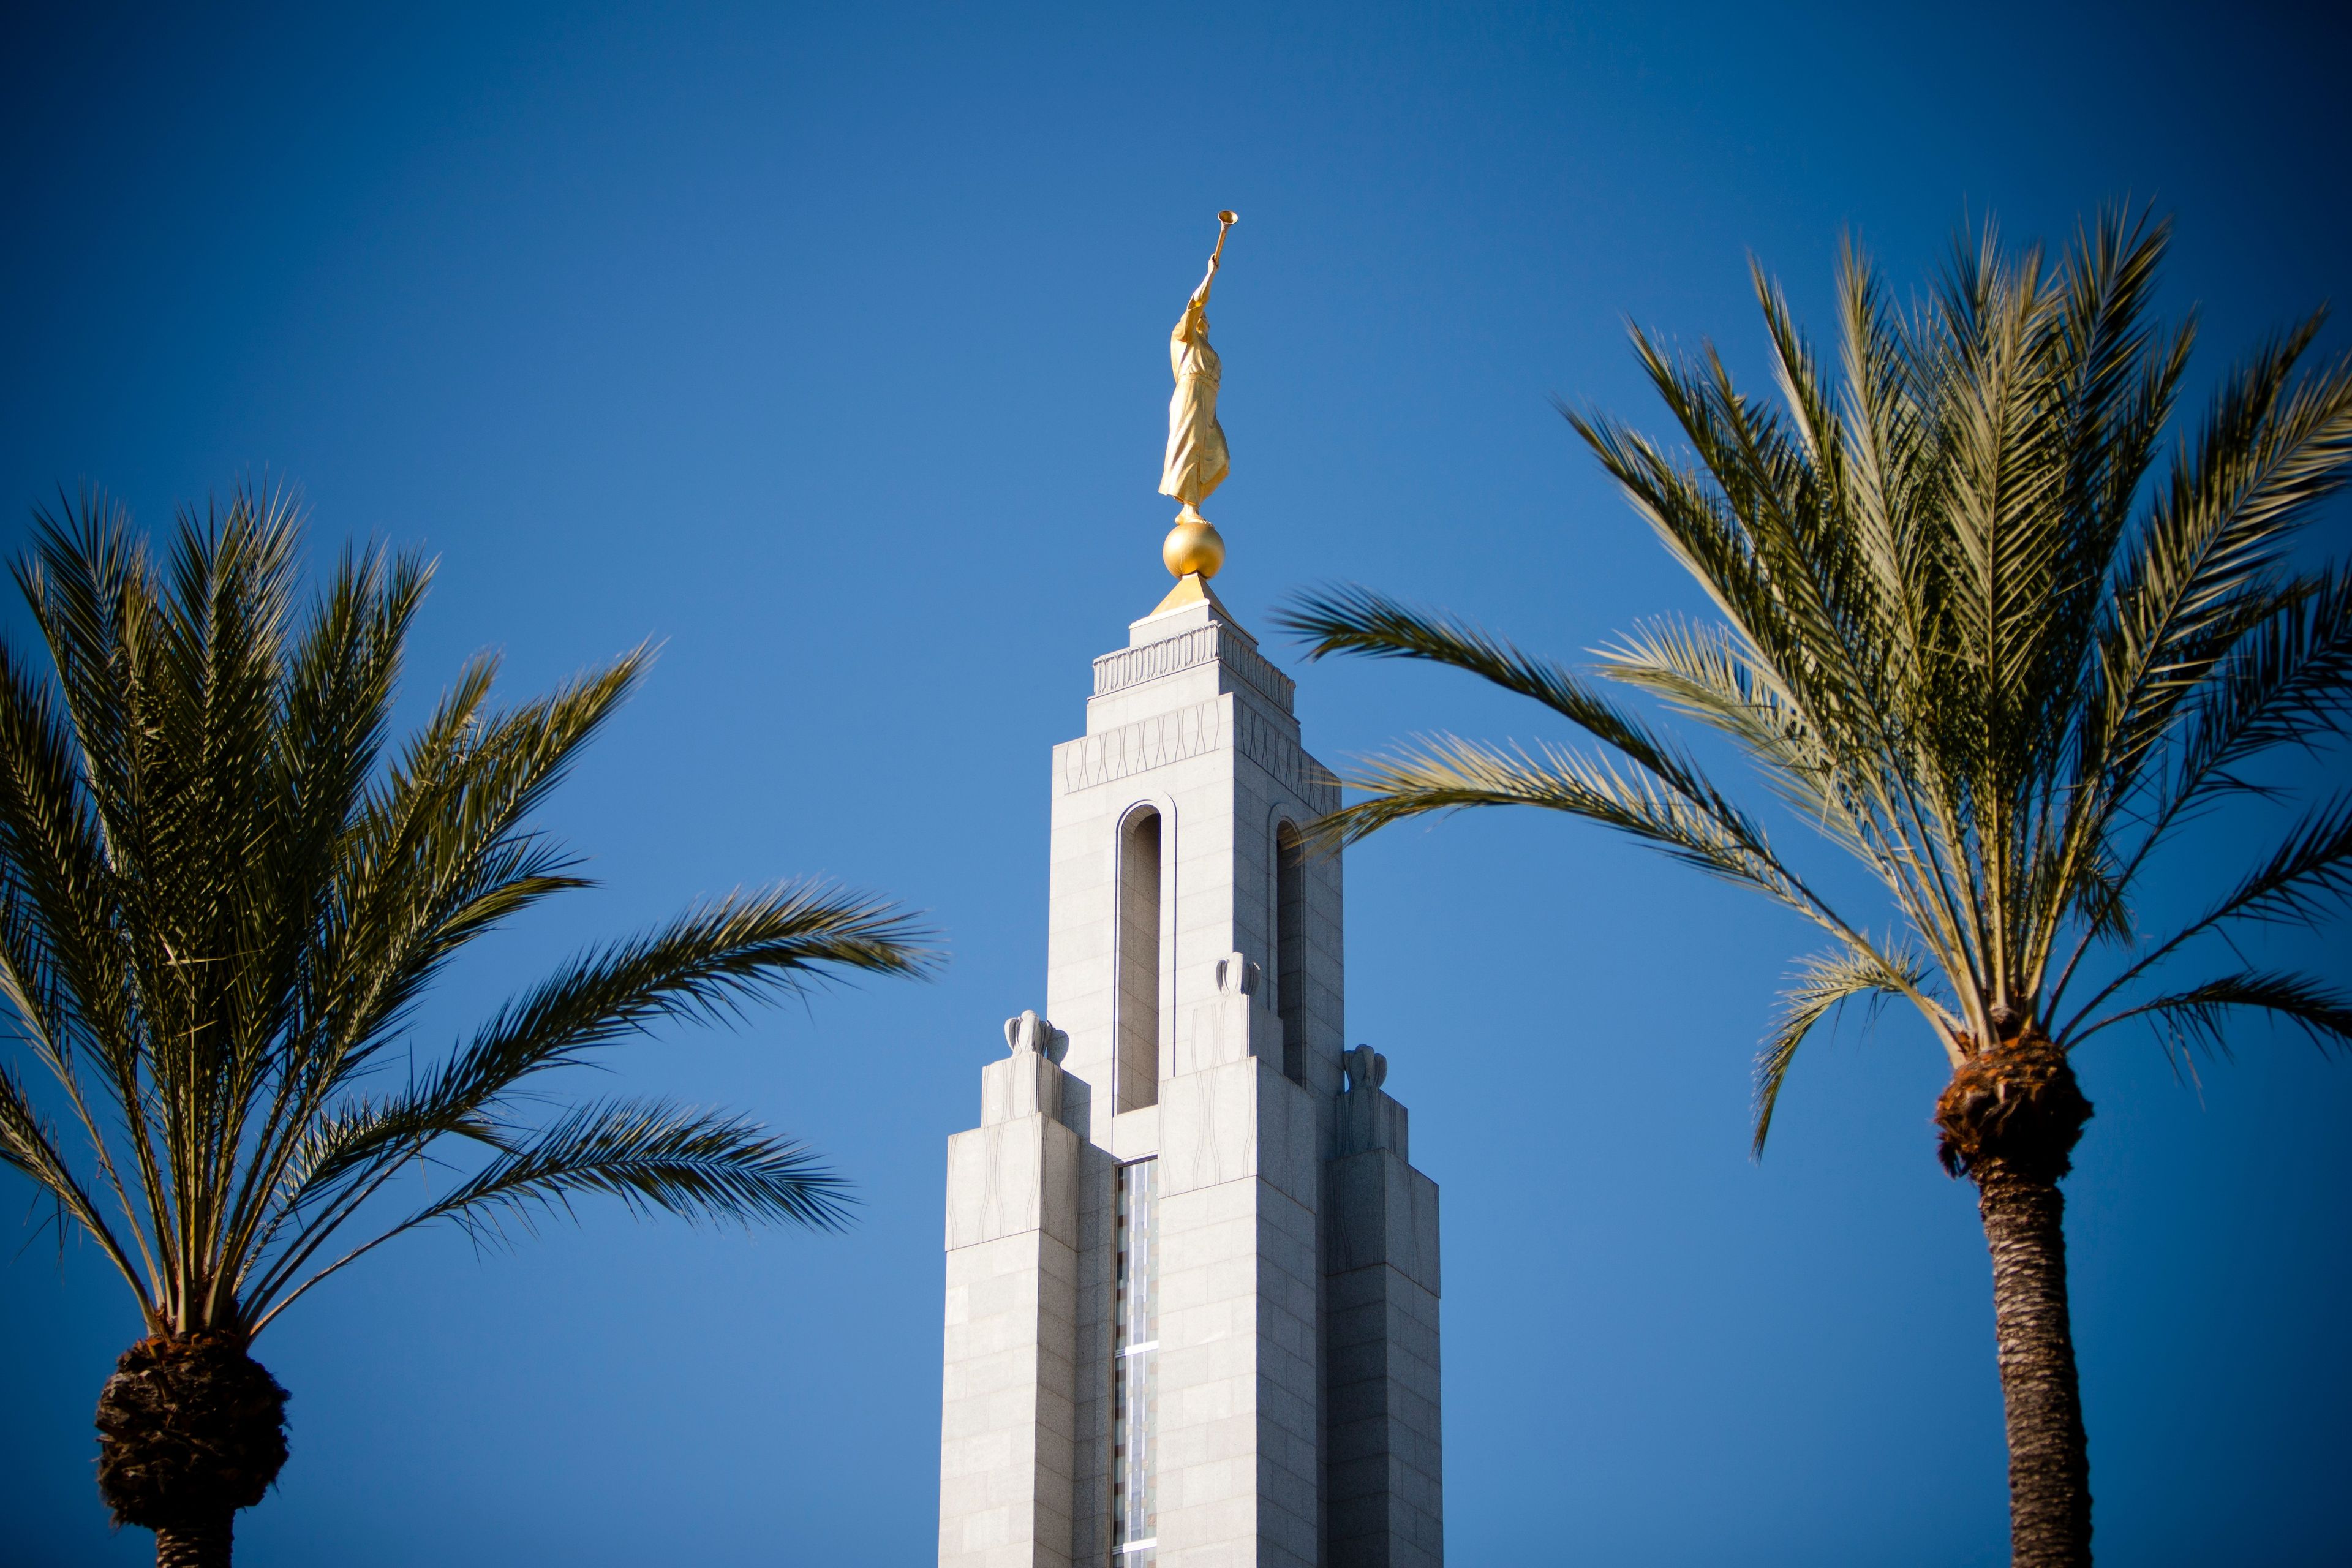 The Redlands California Temple spire, including trees.